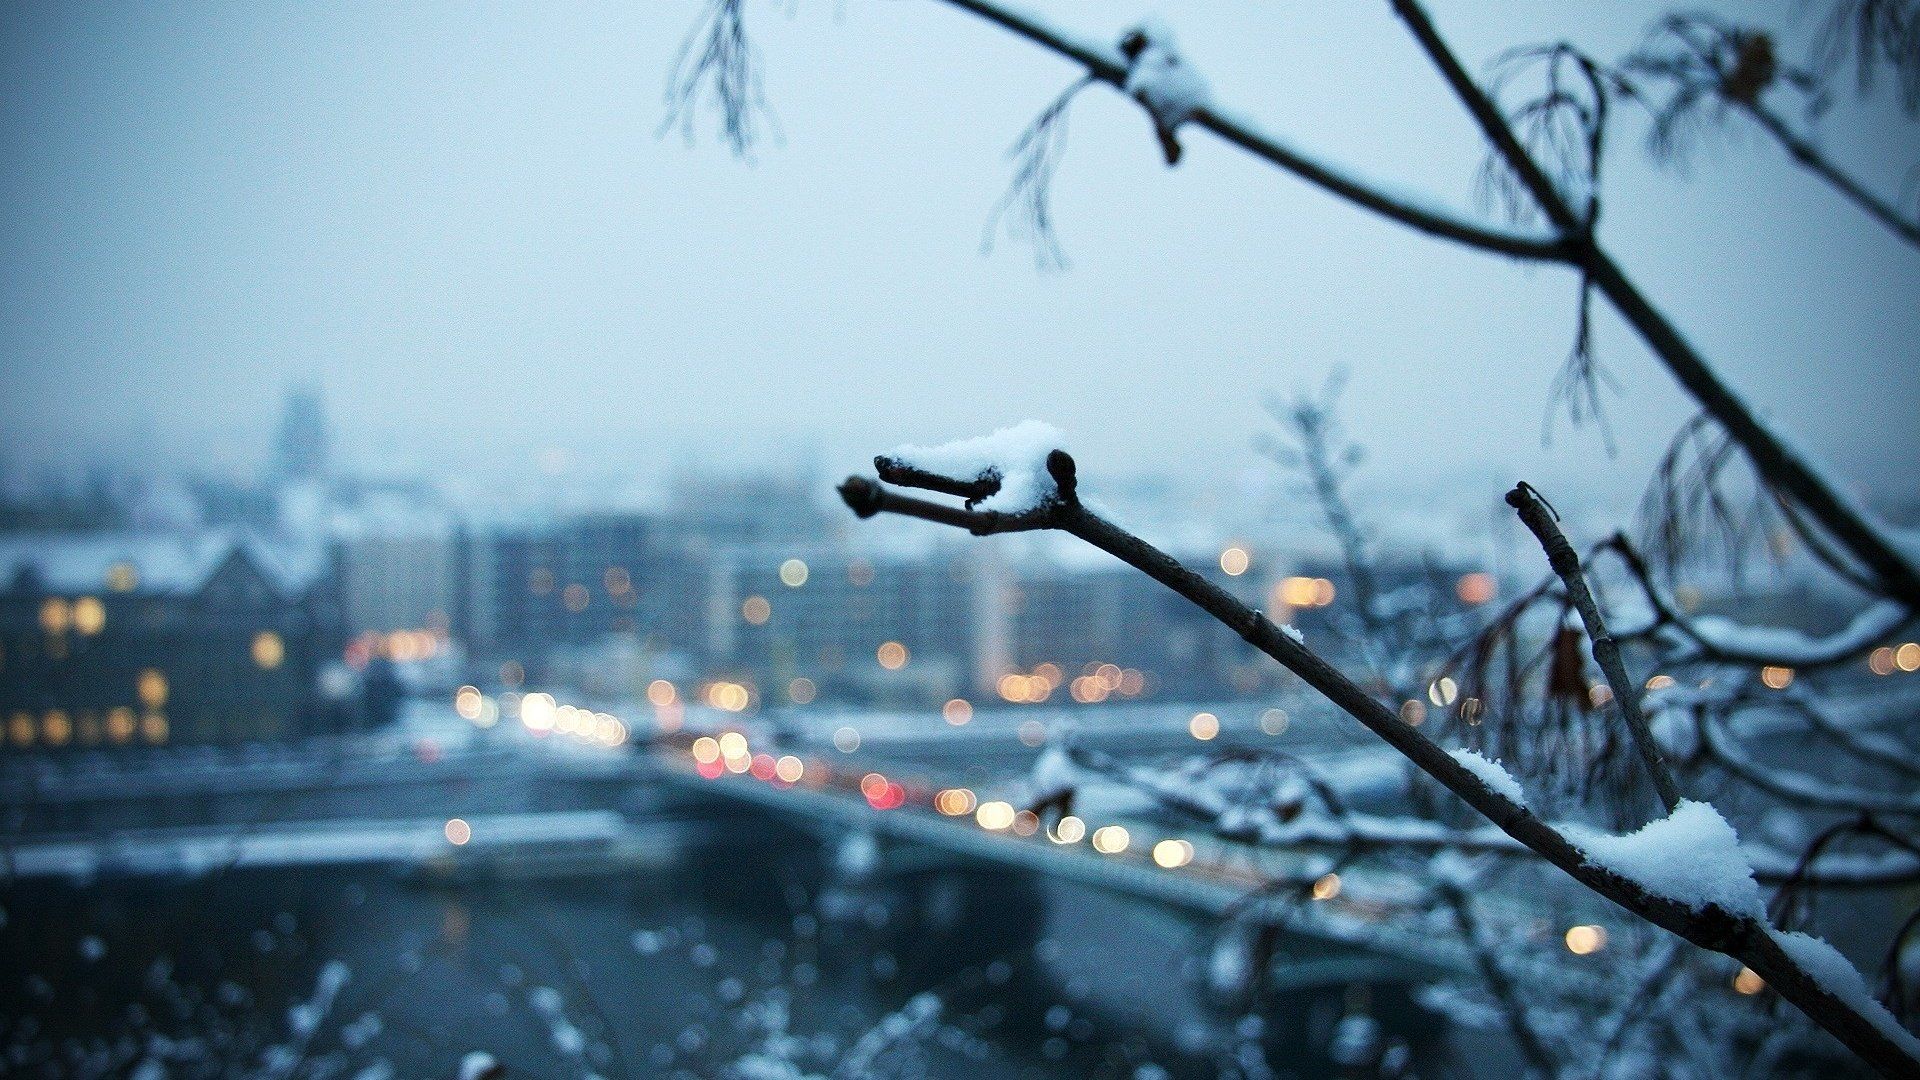 A snow covered branch with a city in the background - Winter